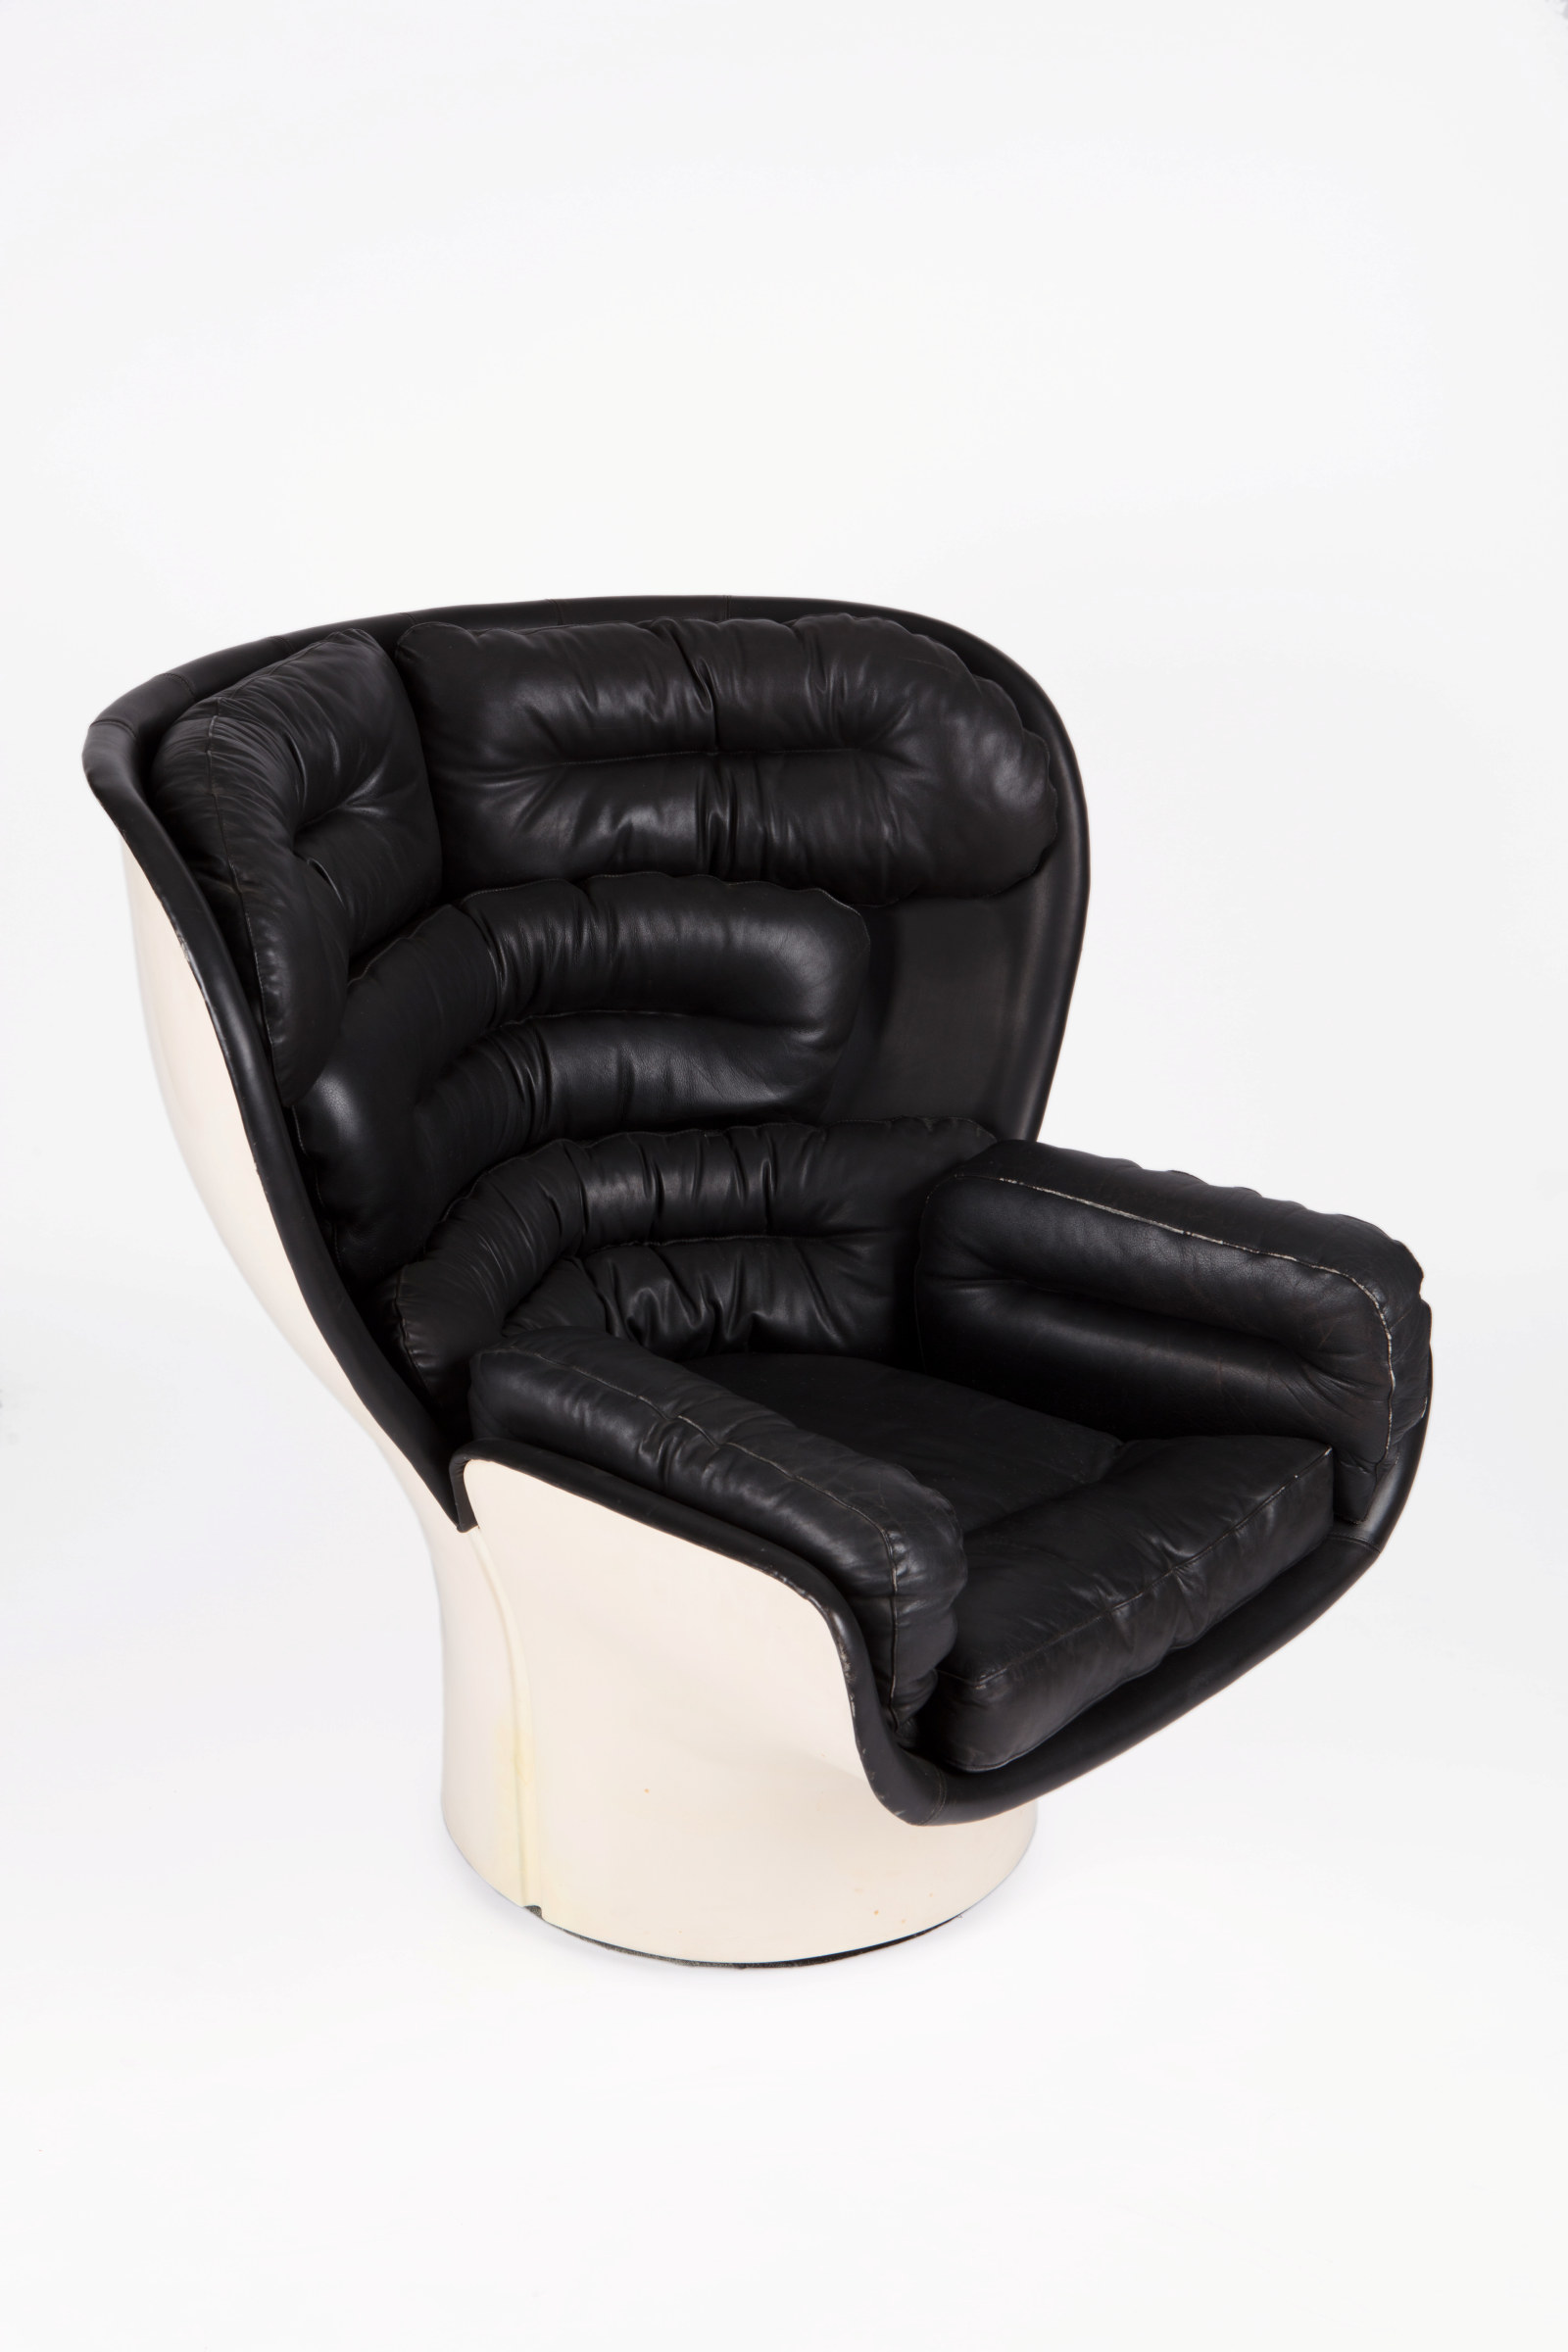 Elda armchair,  leather and fibreglass, design by Joe Colombo and manufactured by Comfort, Italy, 1963.